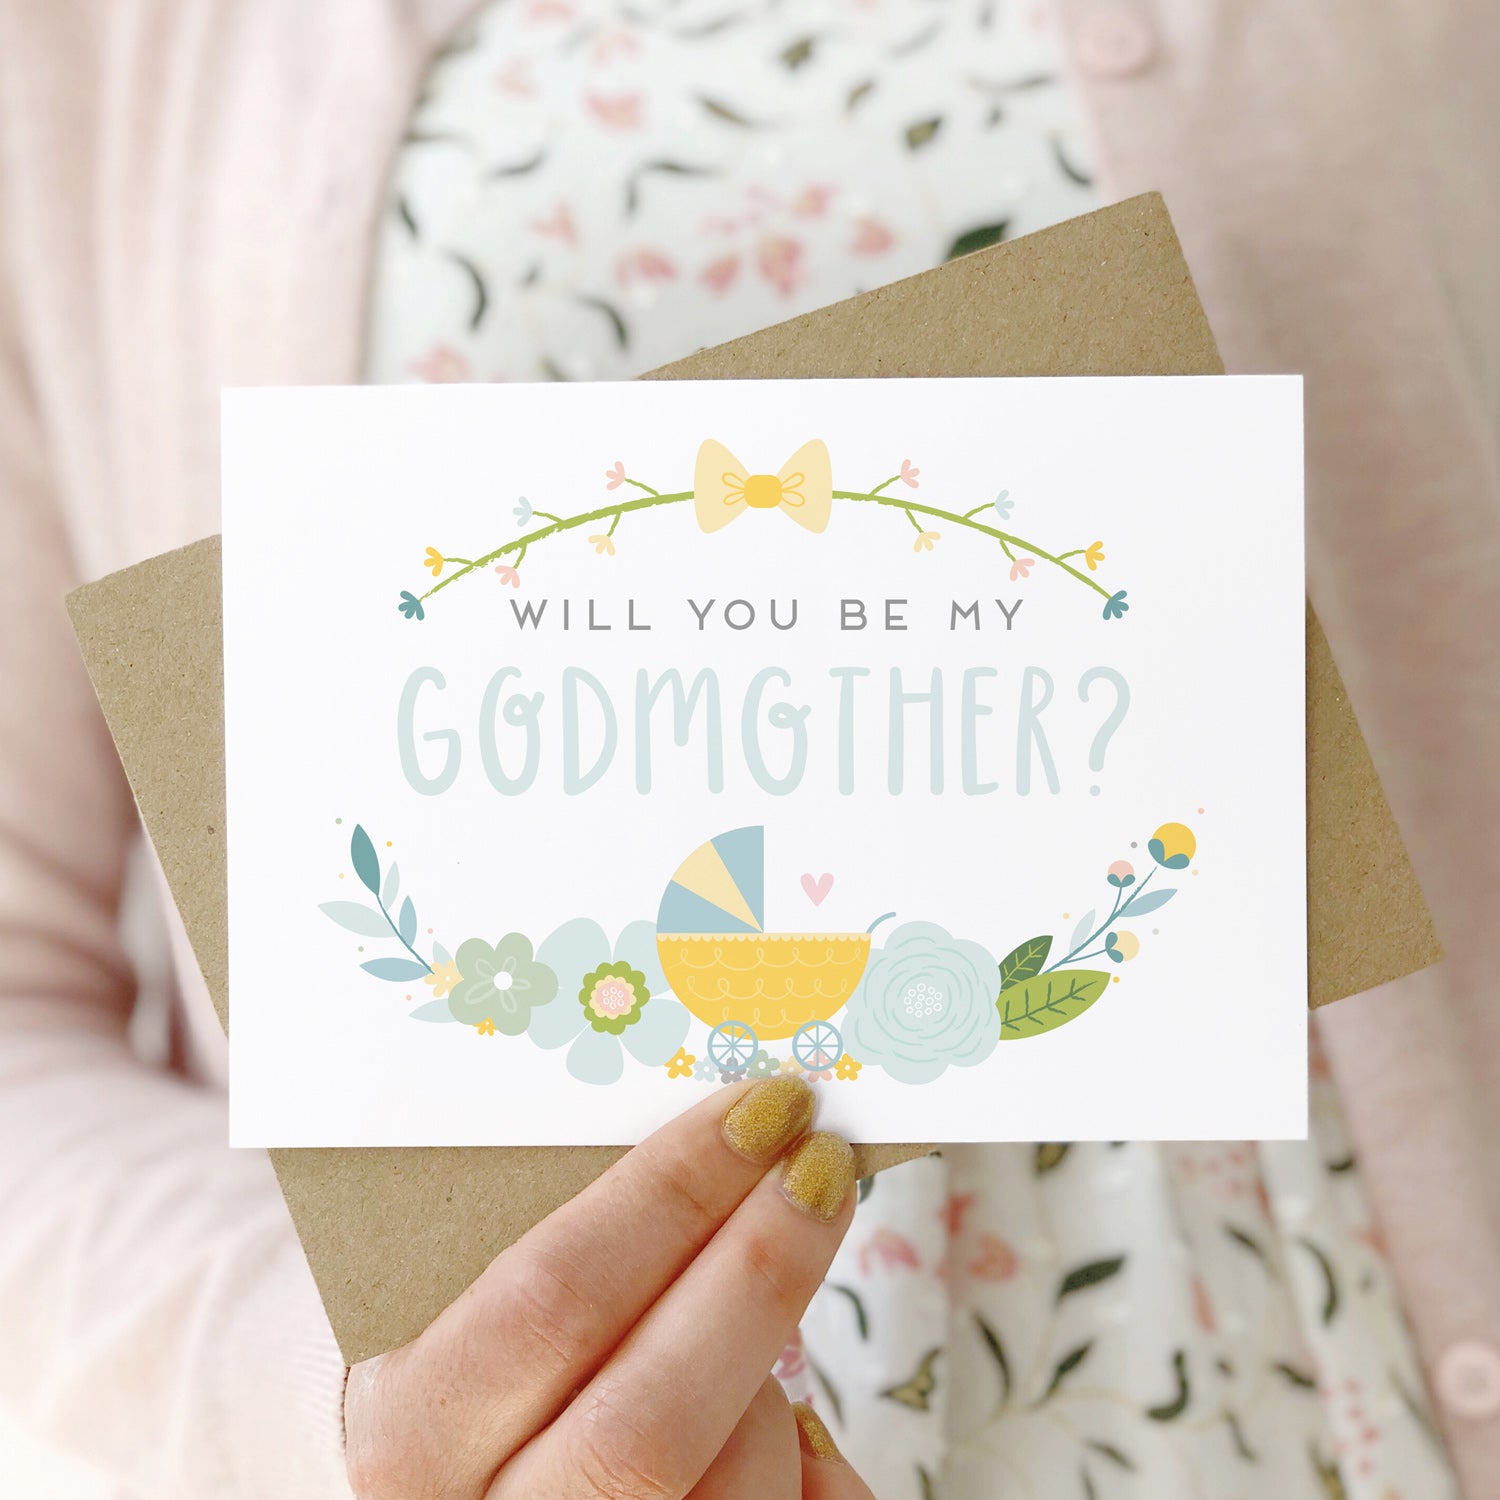 A will you be my godmother card being held in front of a white dress and pink cardigan. The design features a pram, simple florals and the all important question. This is the blue palette.